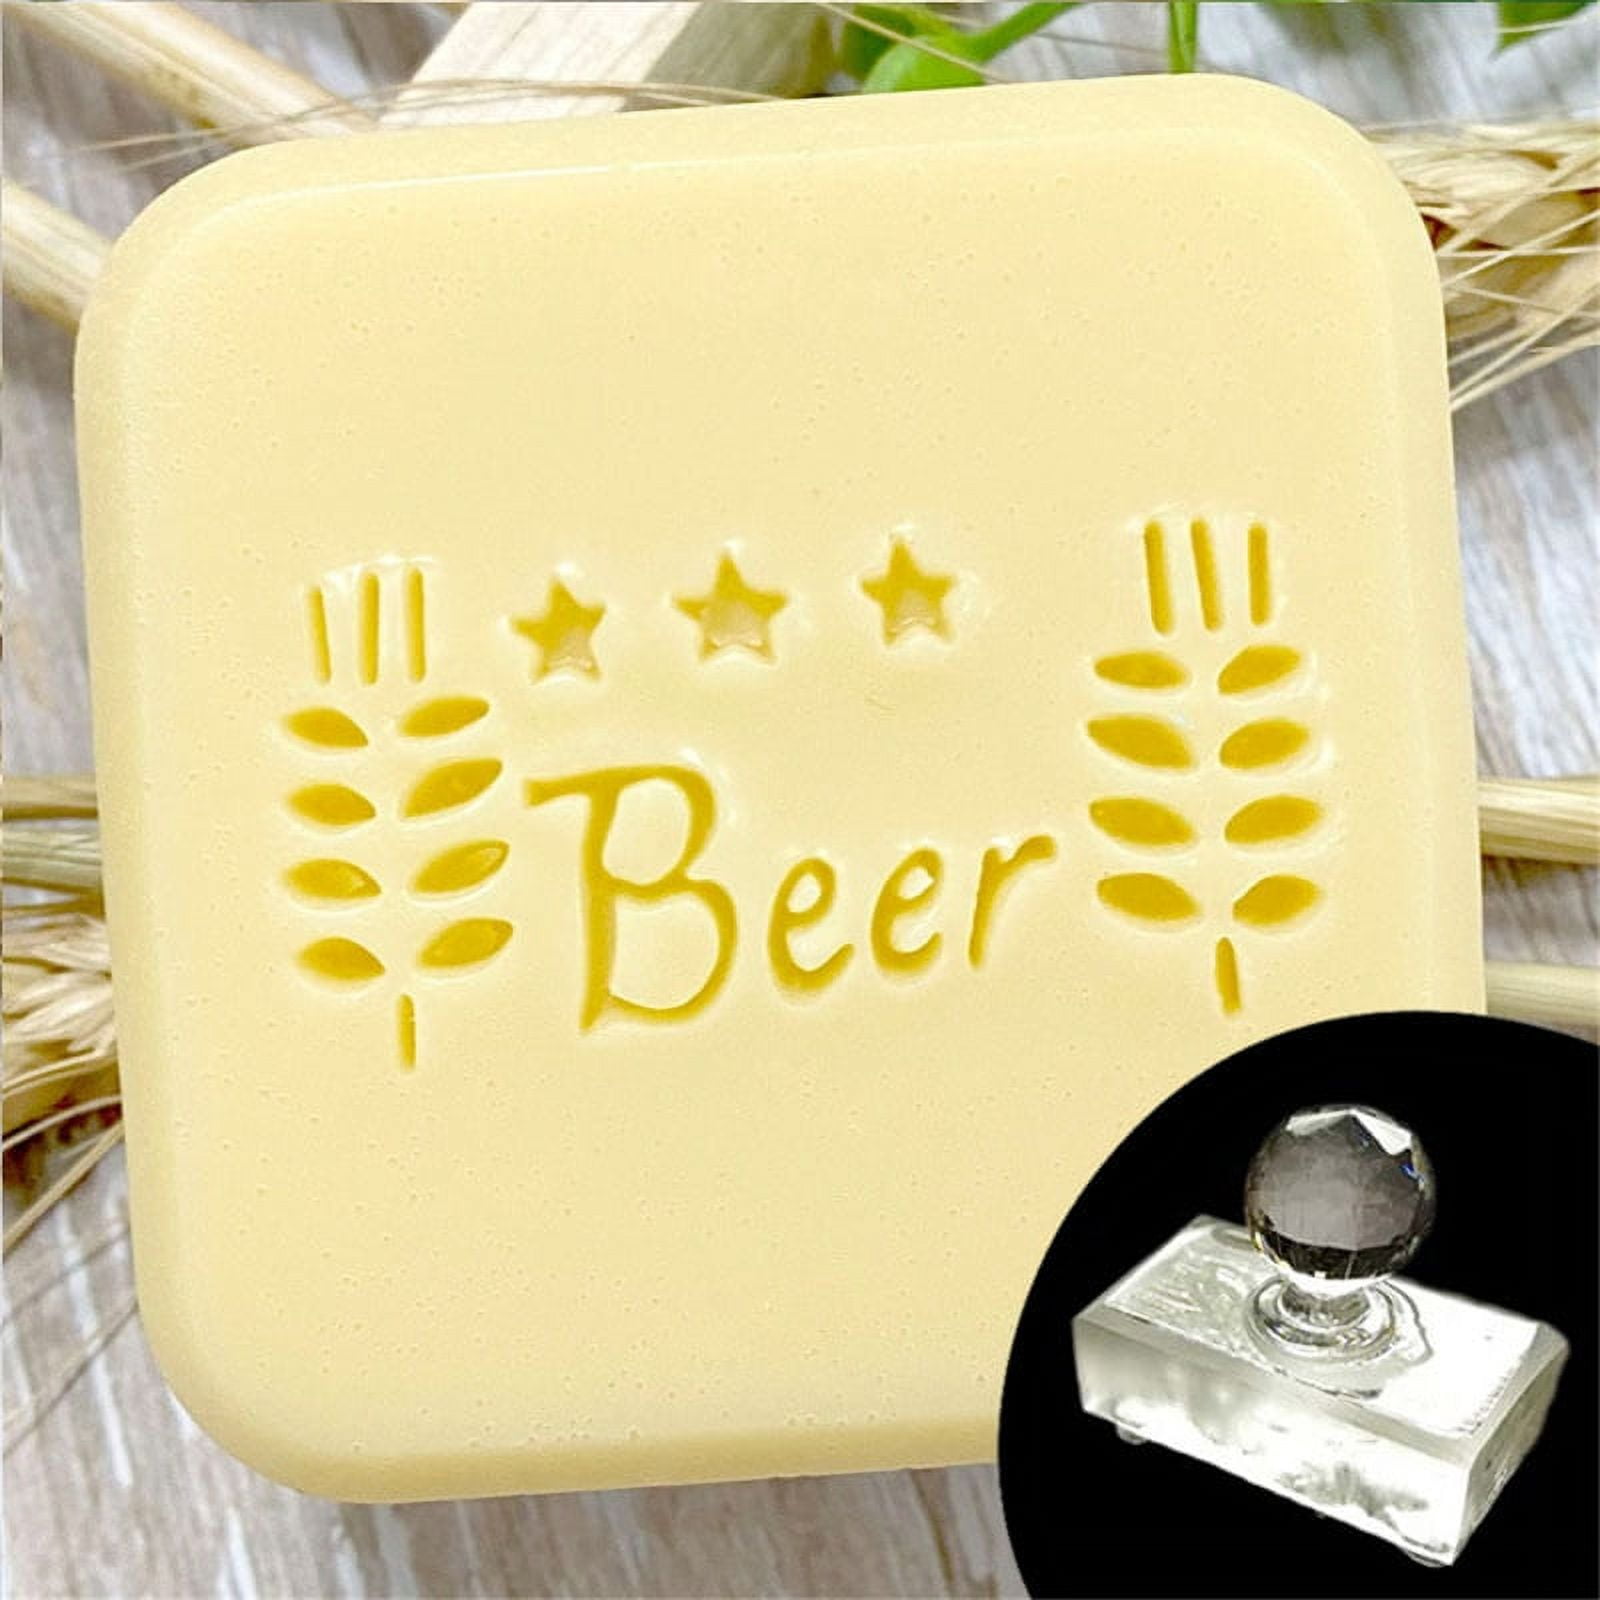 Acrylic Coffee Beer Soap Stamp Handmade Crafts Soaps Seal English